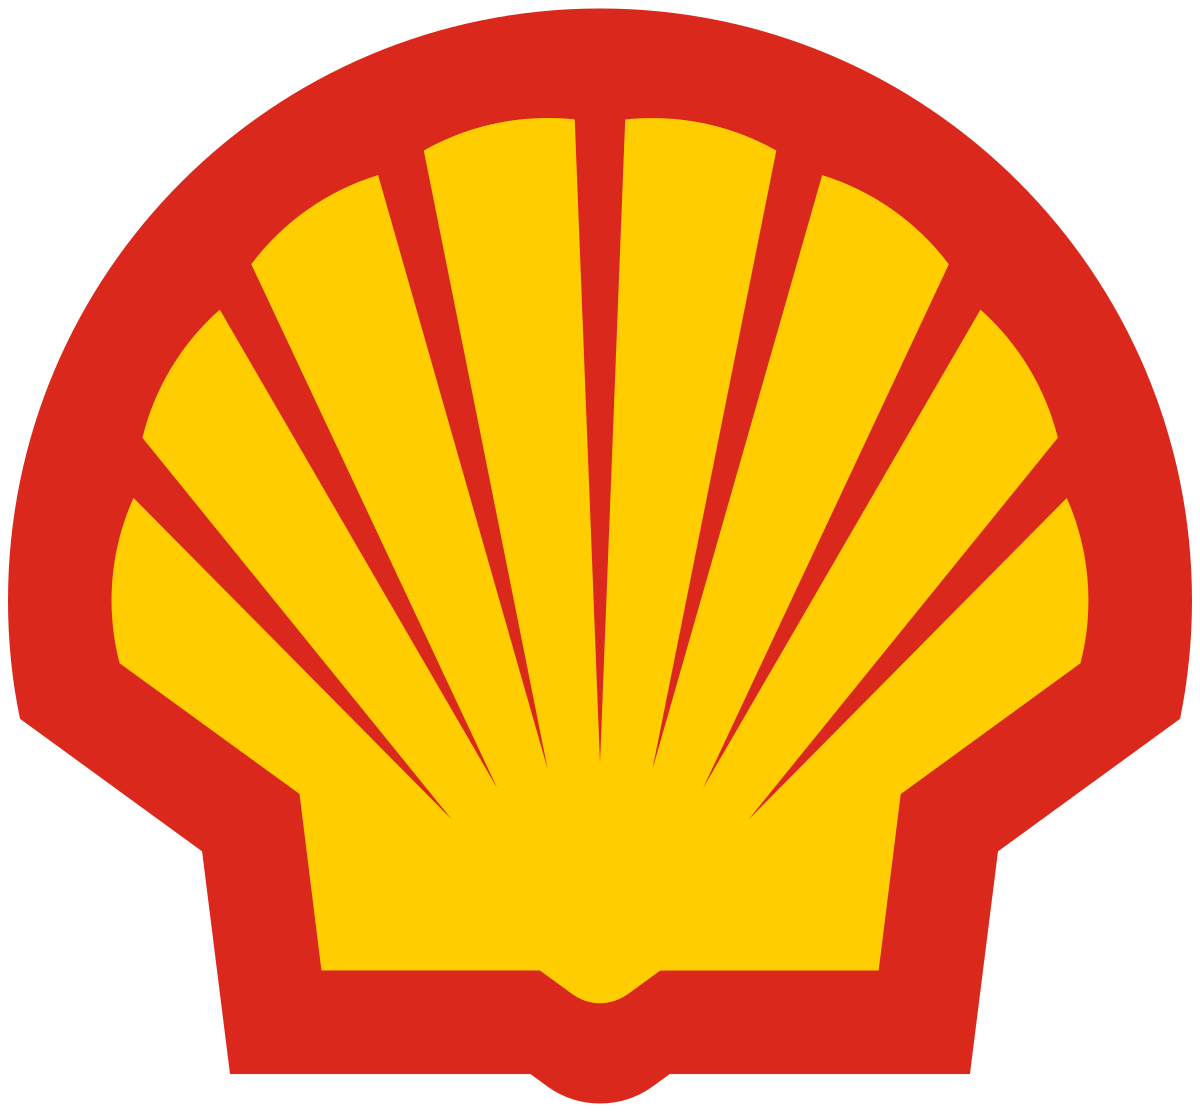 Shell plc Oil industry corporation